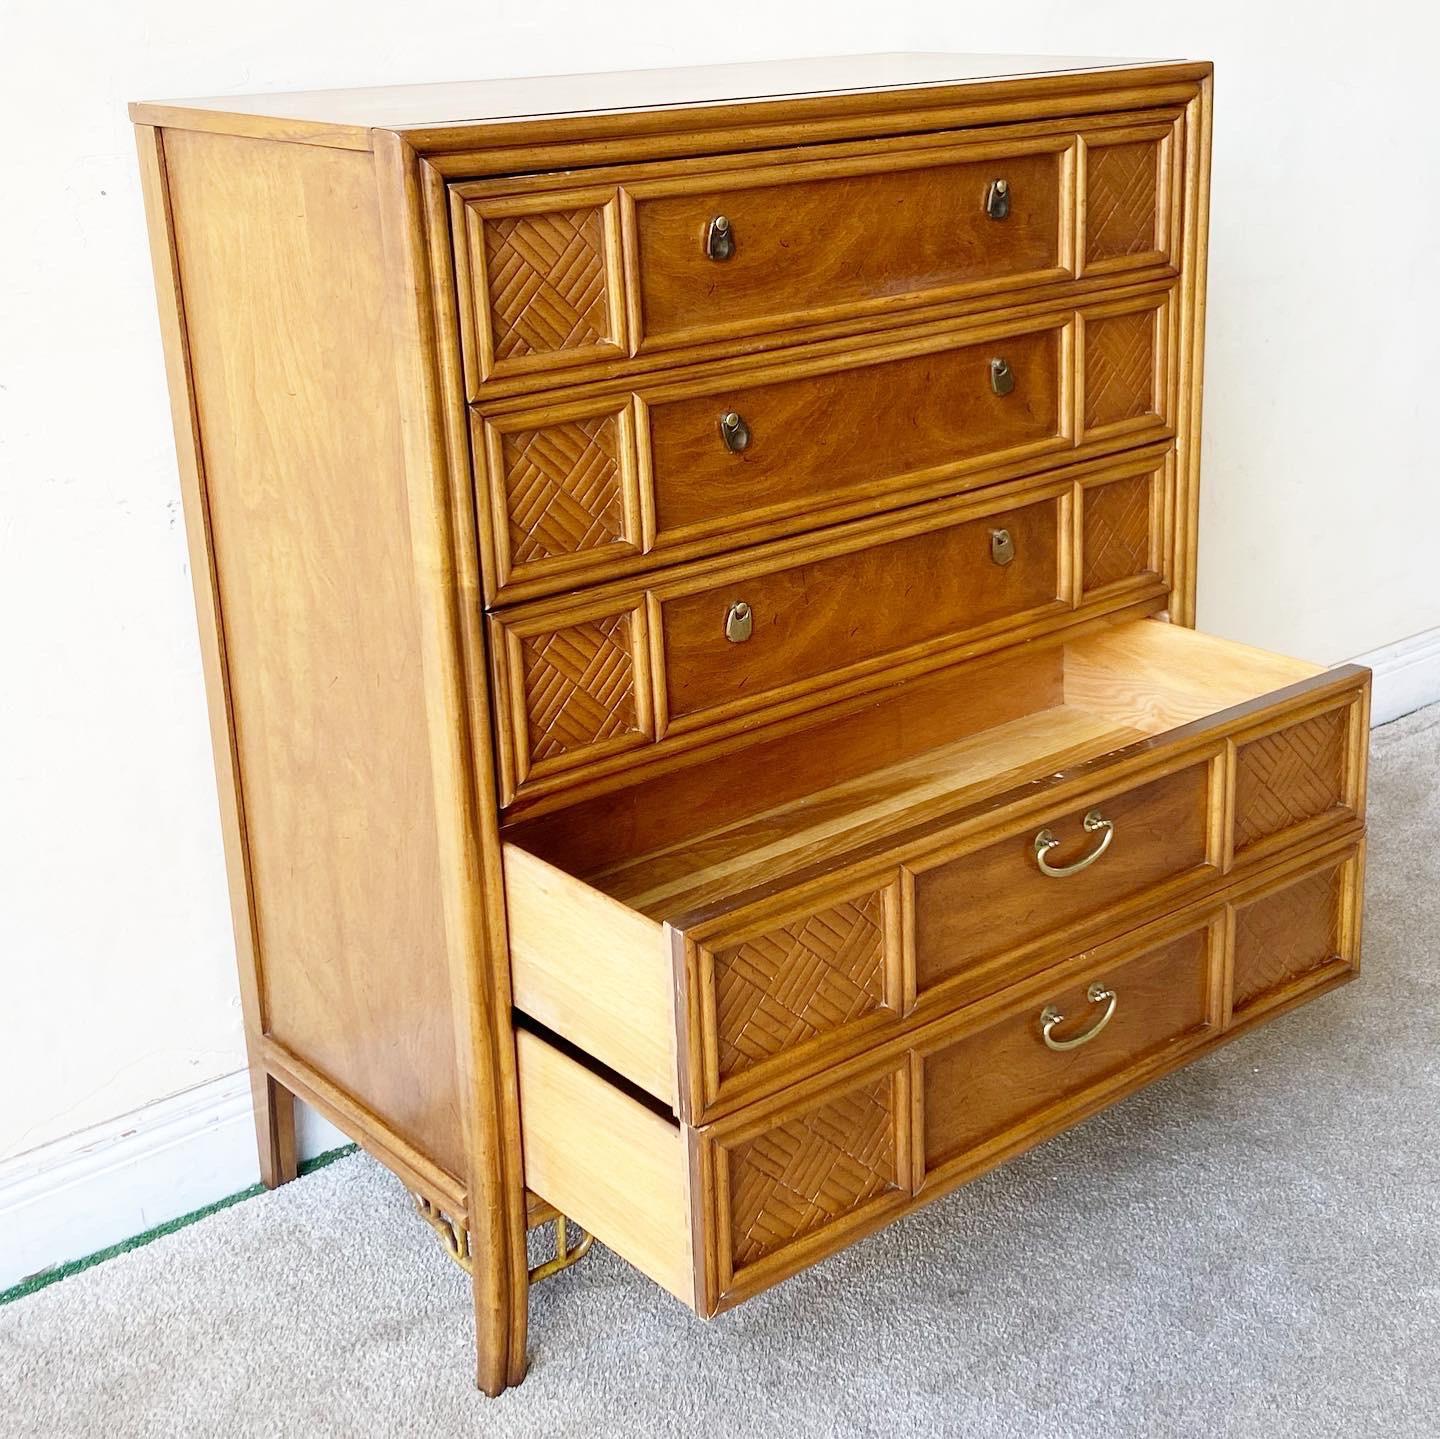 Incredible mid Century chinoiserie highboy dresser by Thomasville furniture Co. Features spacious drawers and a walnut finish.
